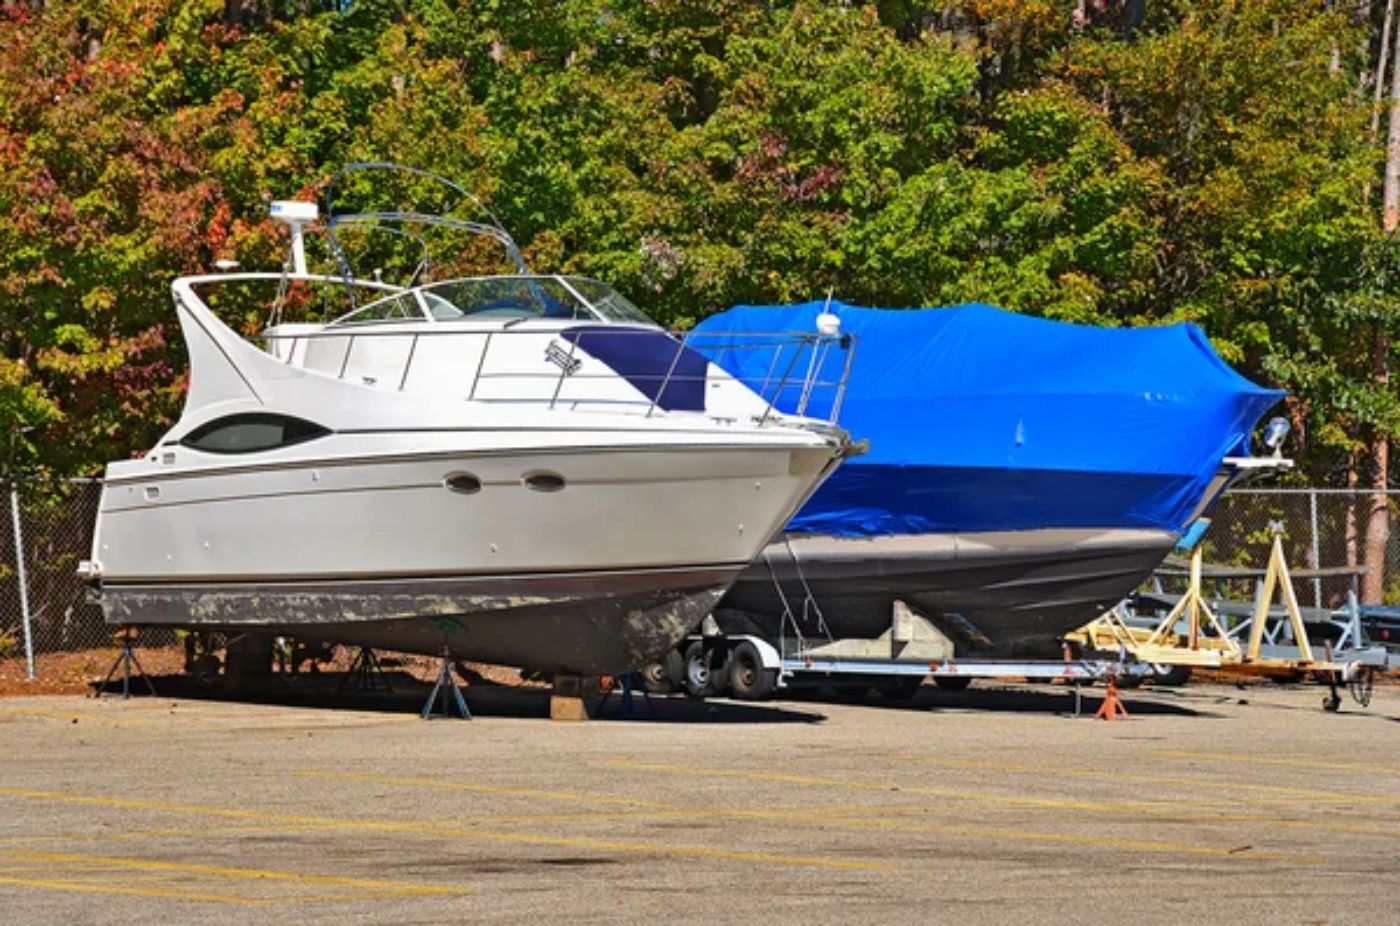 Shrink Wrap vs. Boat Cover - SugarHouse Industries